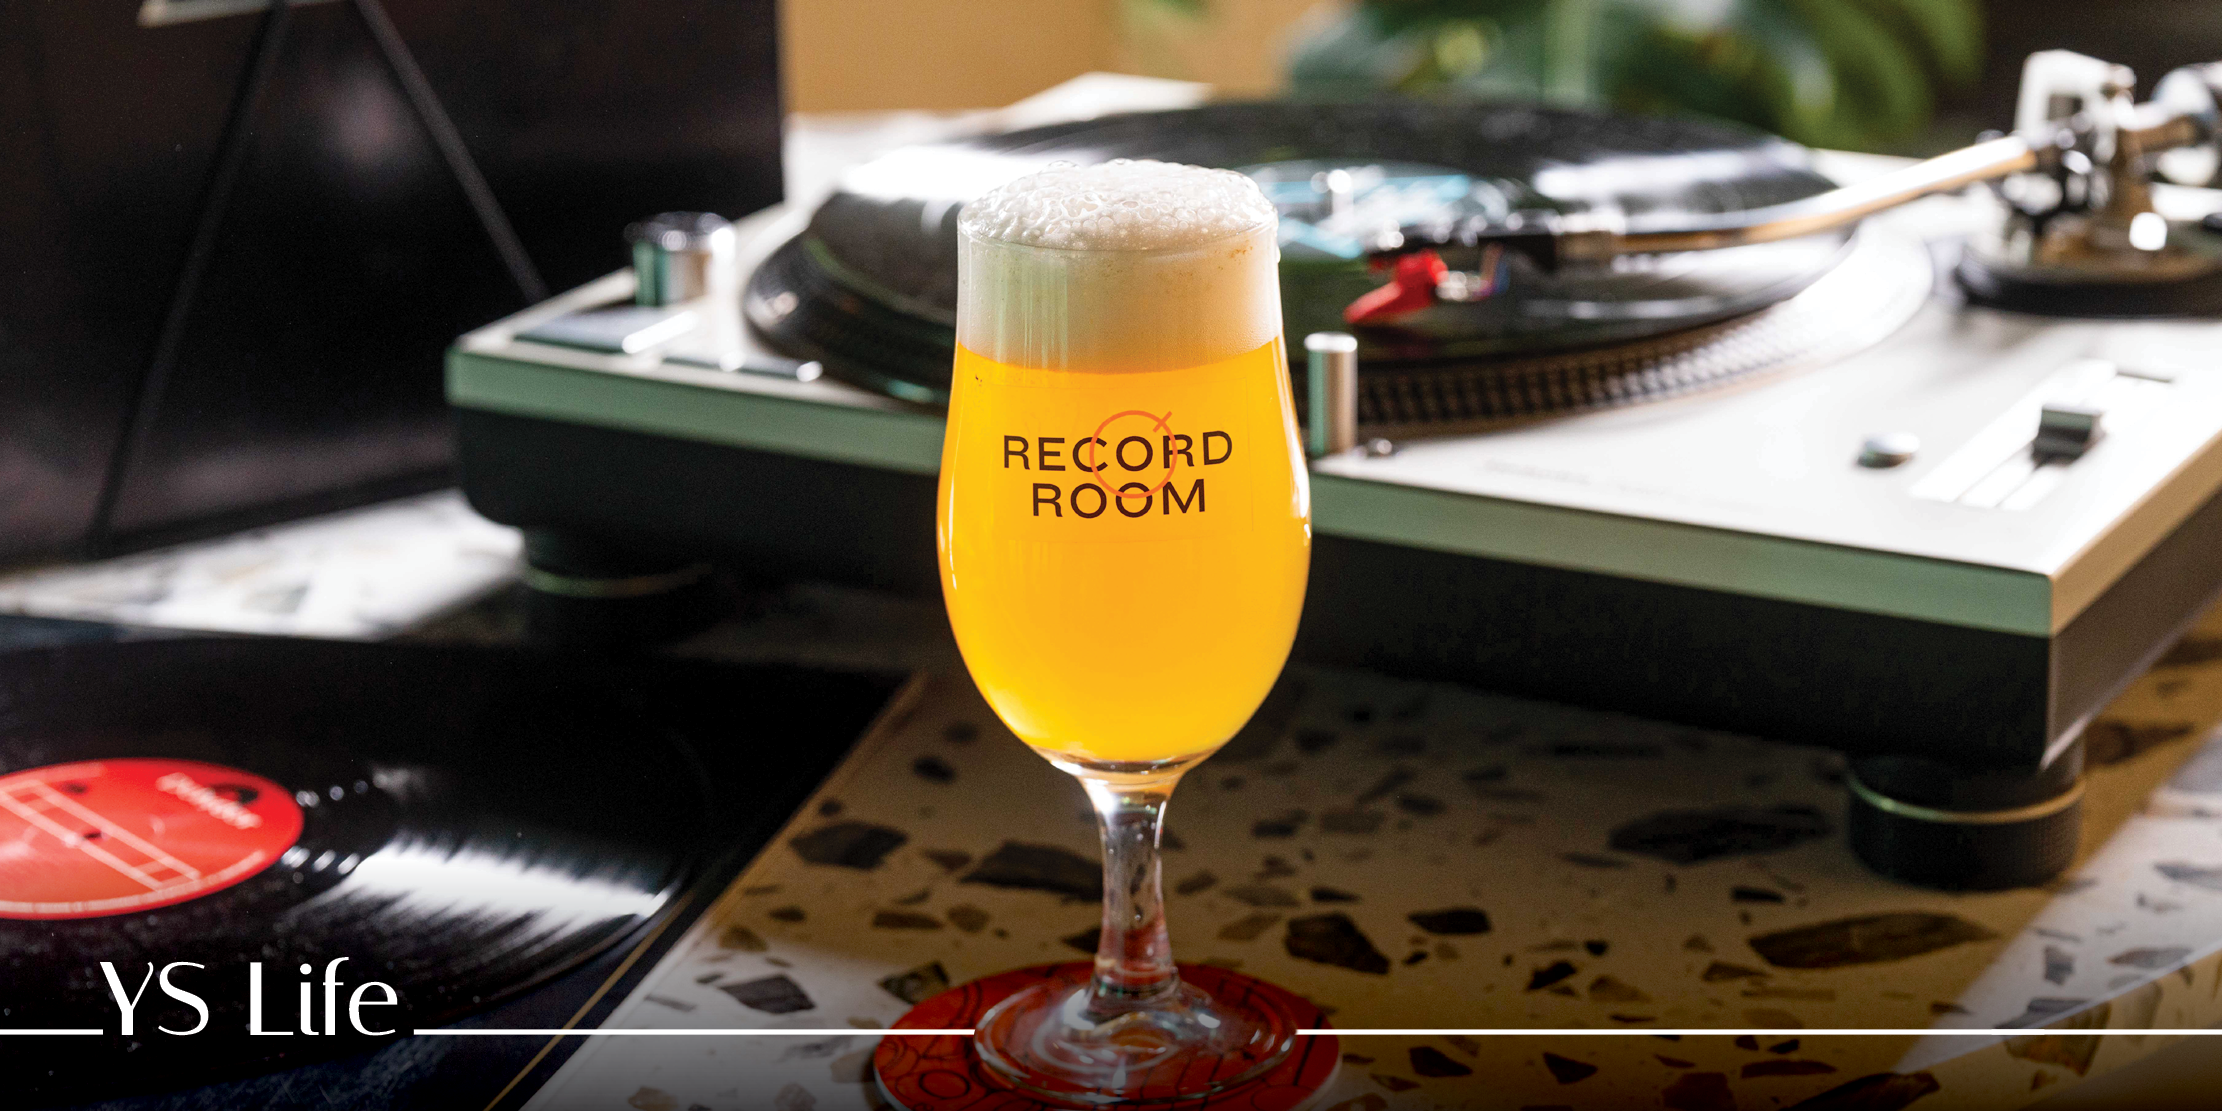 At Record Room, indulge in a unique blend of music, beer, and food